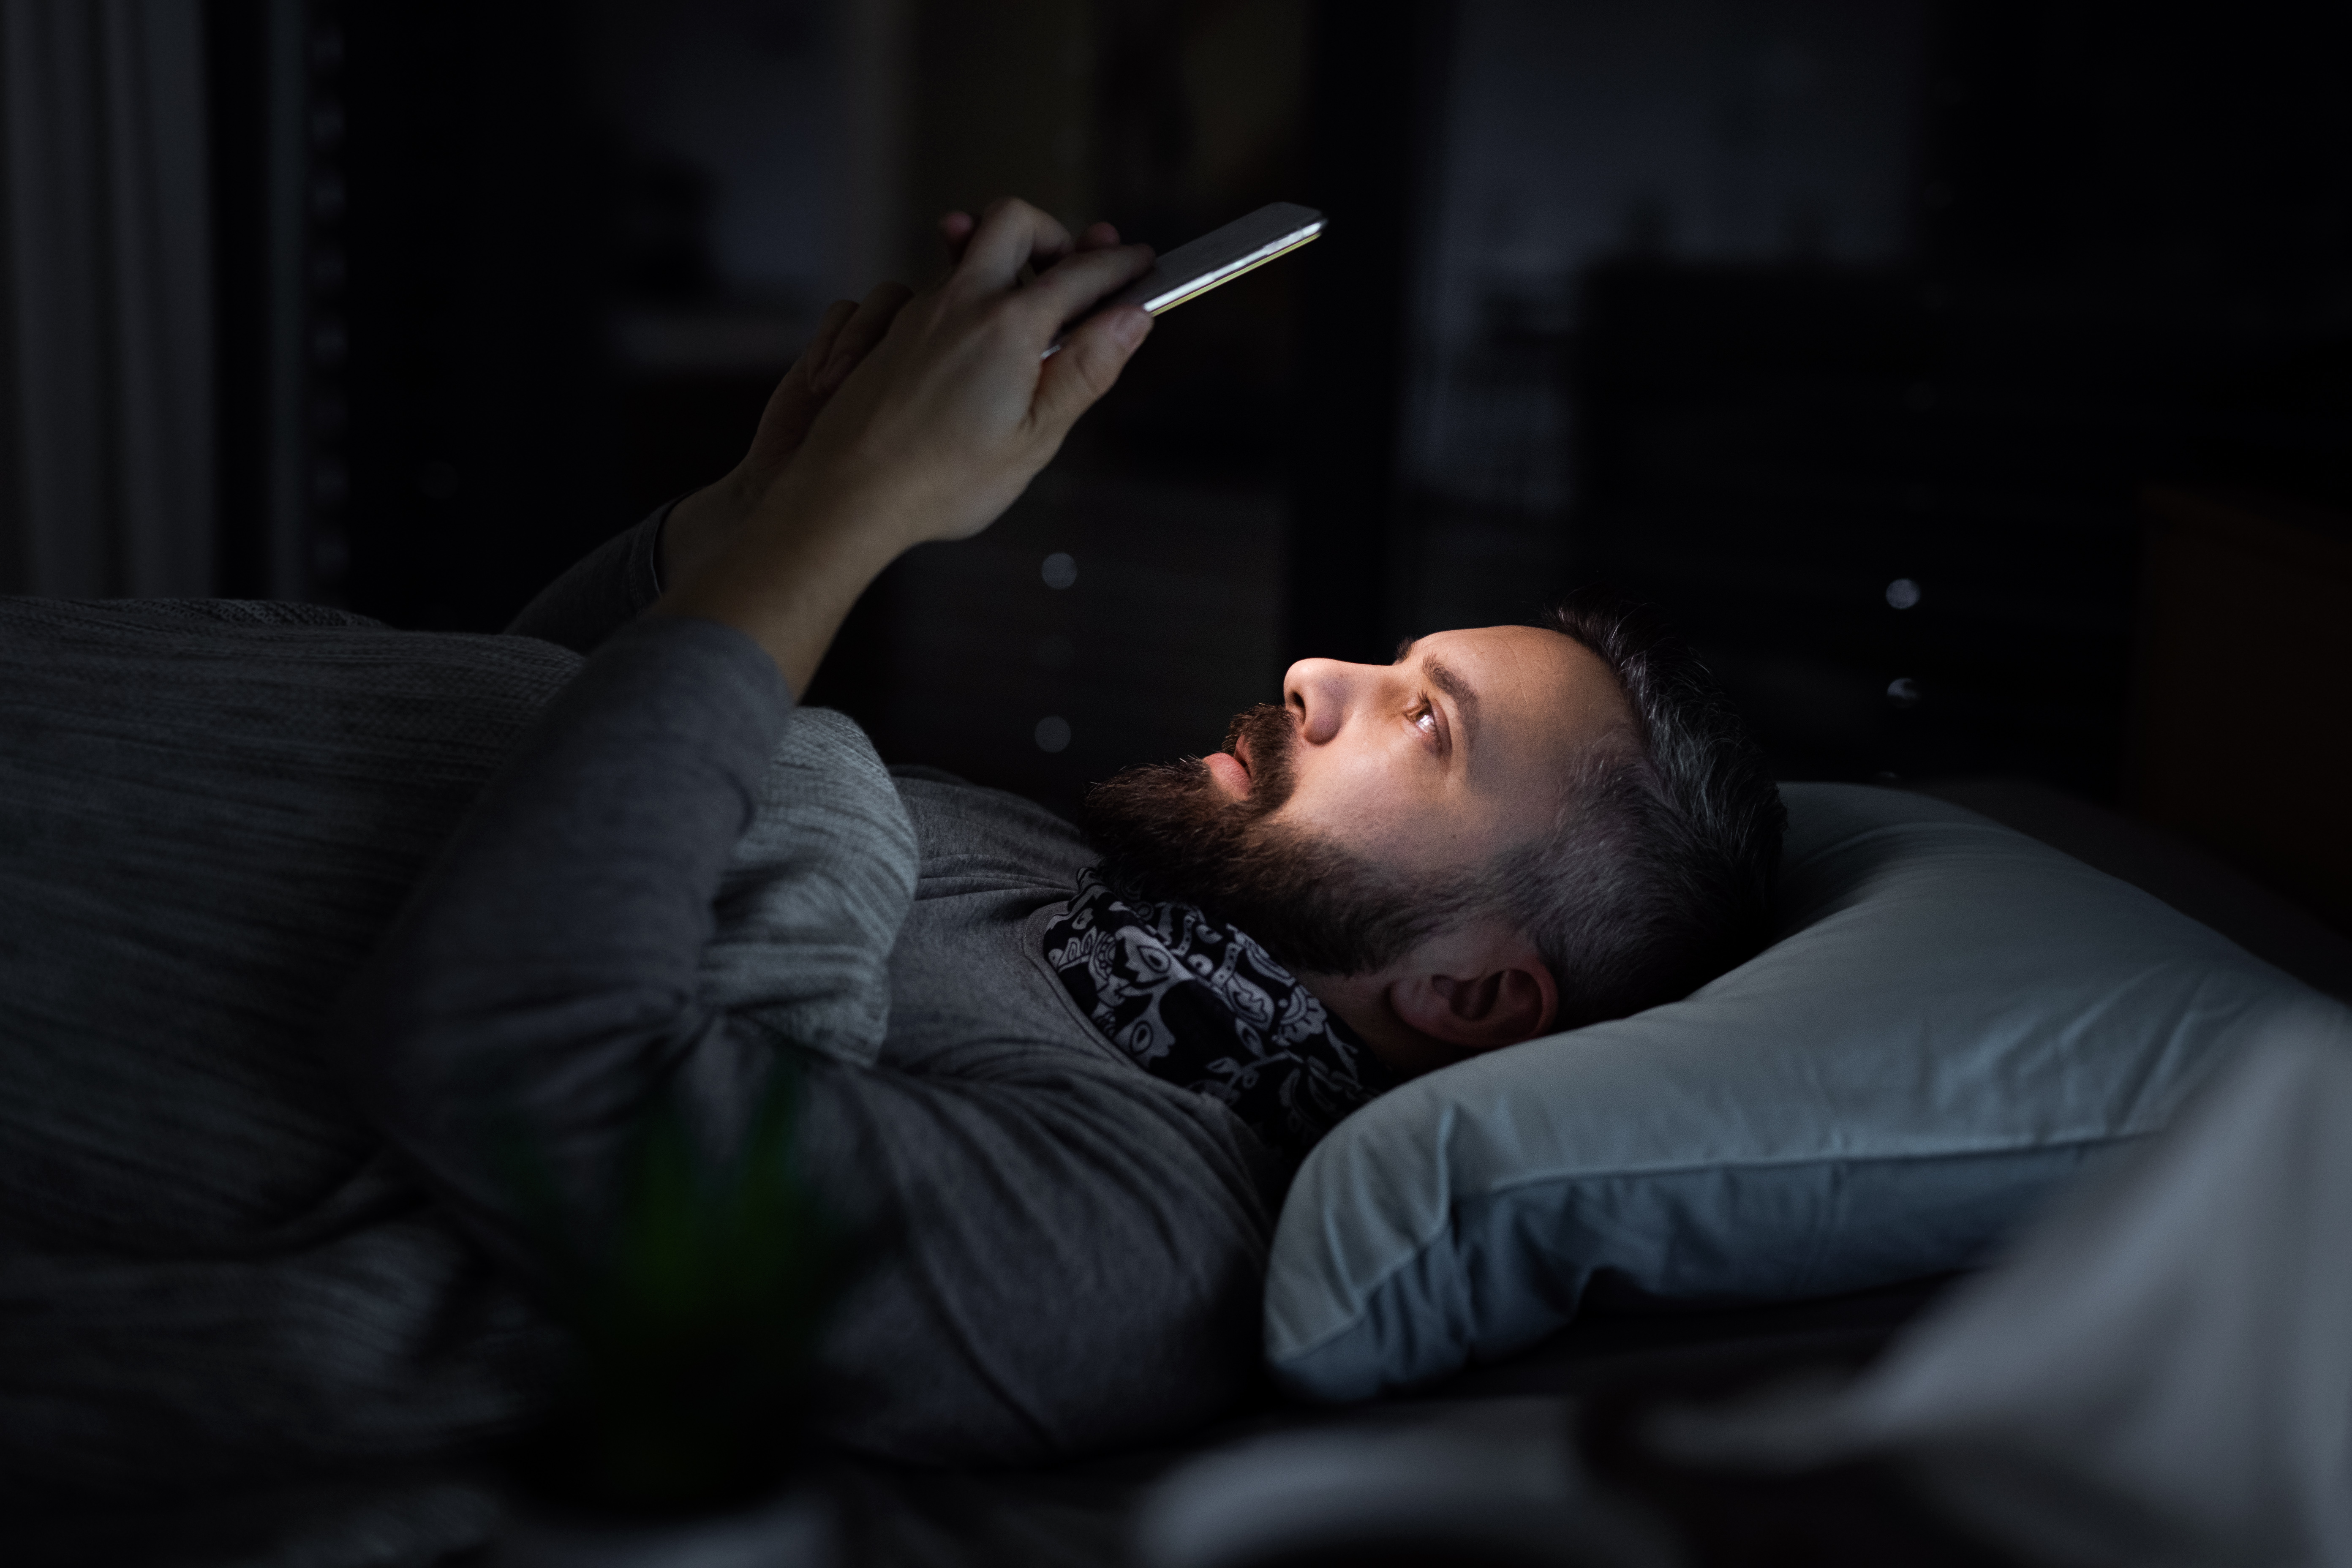 Does Apple's new Night Shift mode really give you a better night's sleep?, Sleep